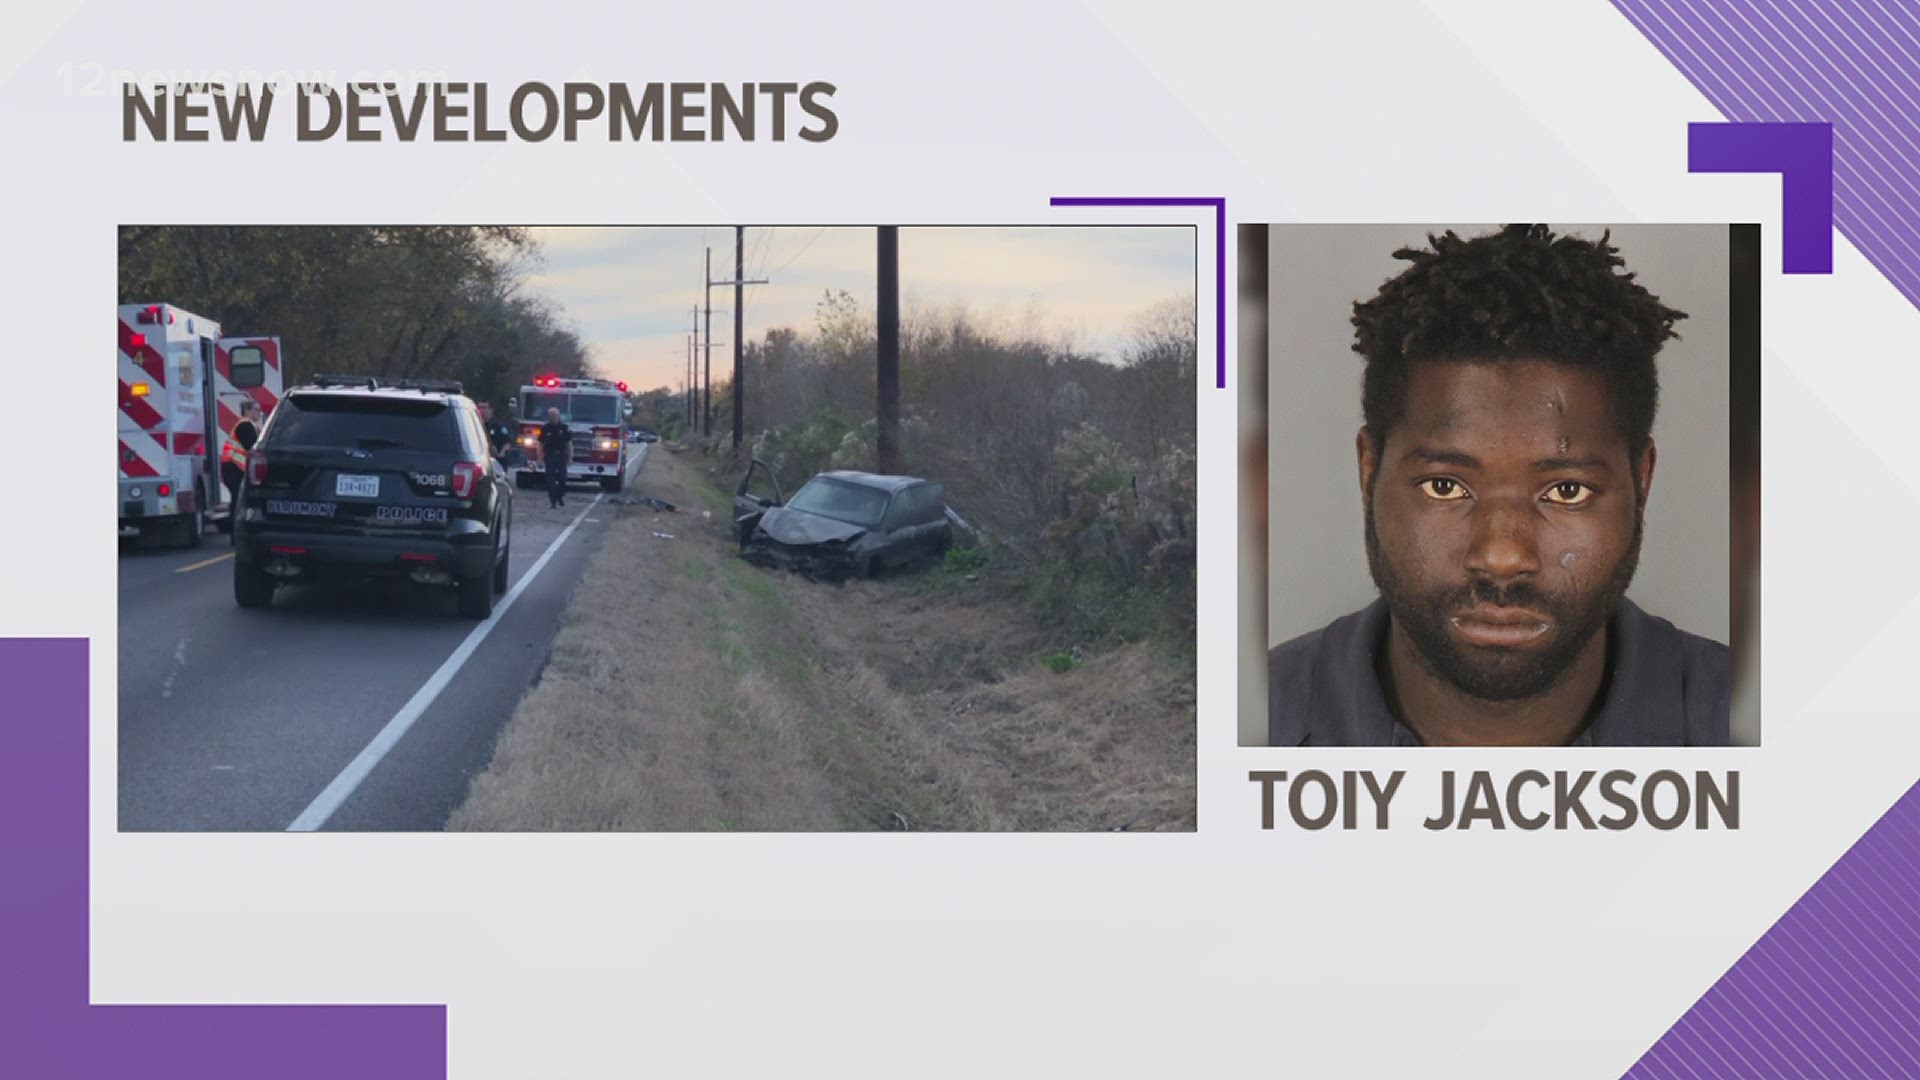 Toiy Jackson will serve a 10 year probated sentence in connection with a deadly crash